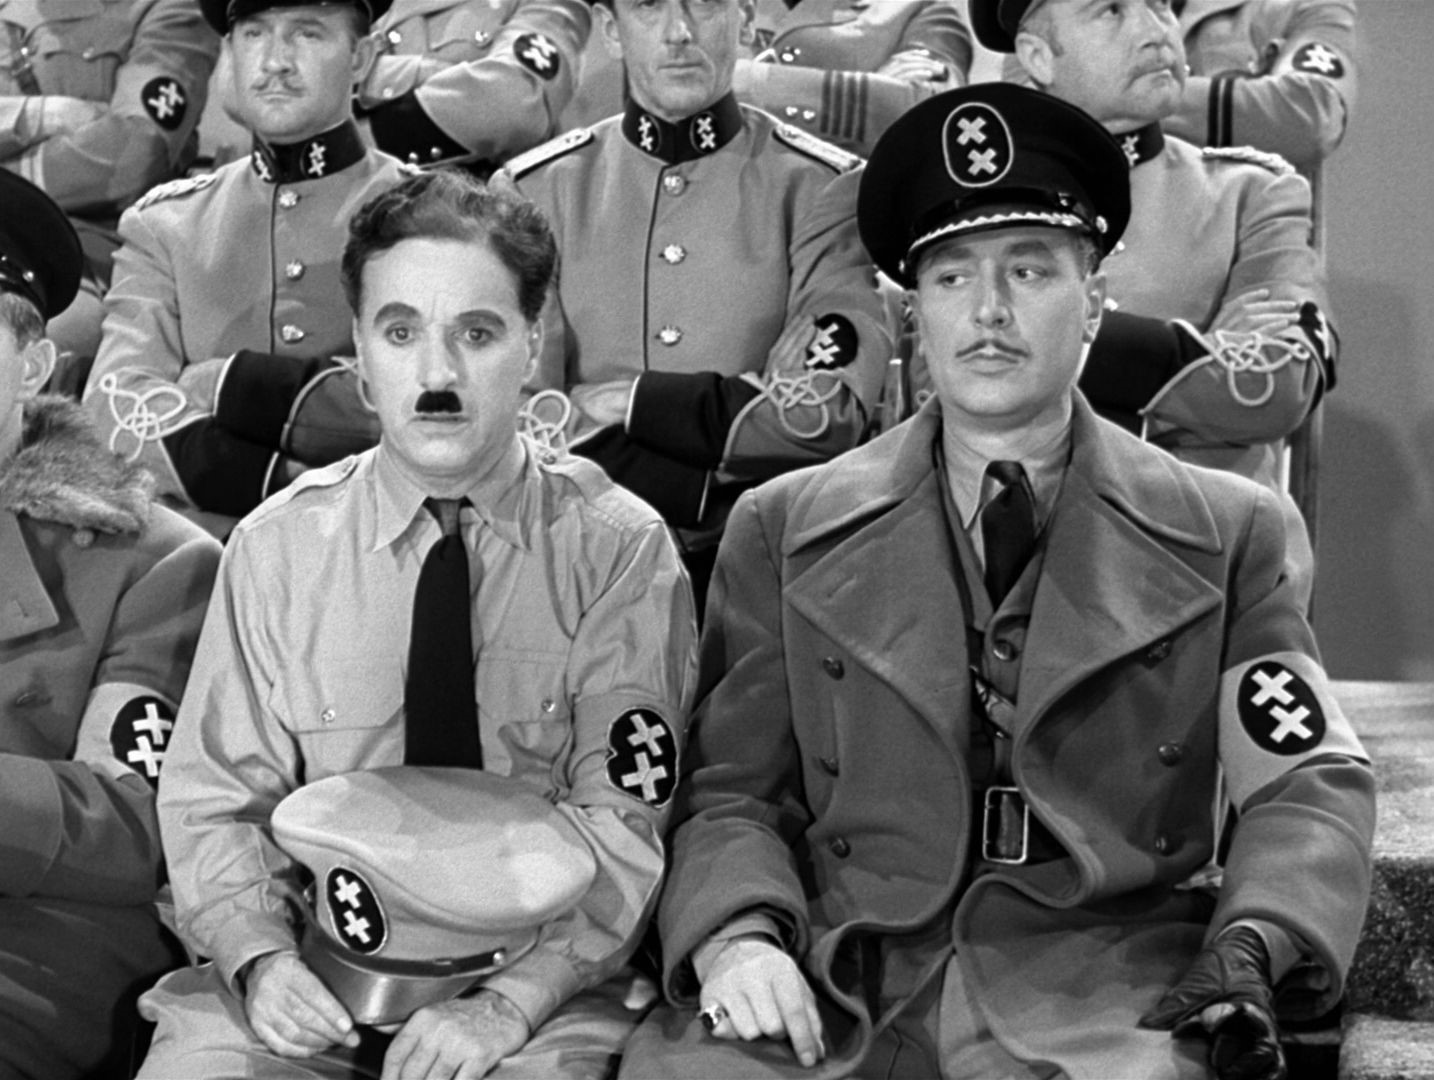 THE GREAT DICTATOR: A Common Ignorance